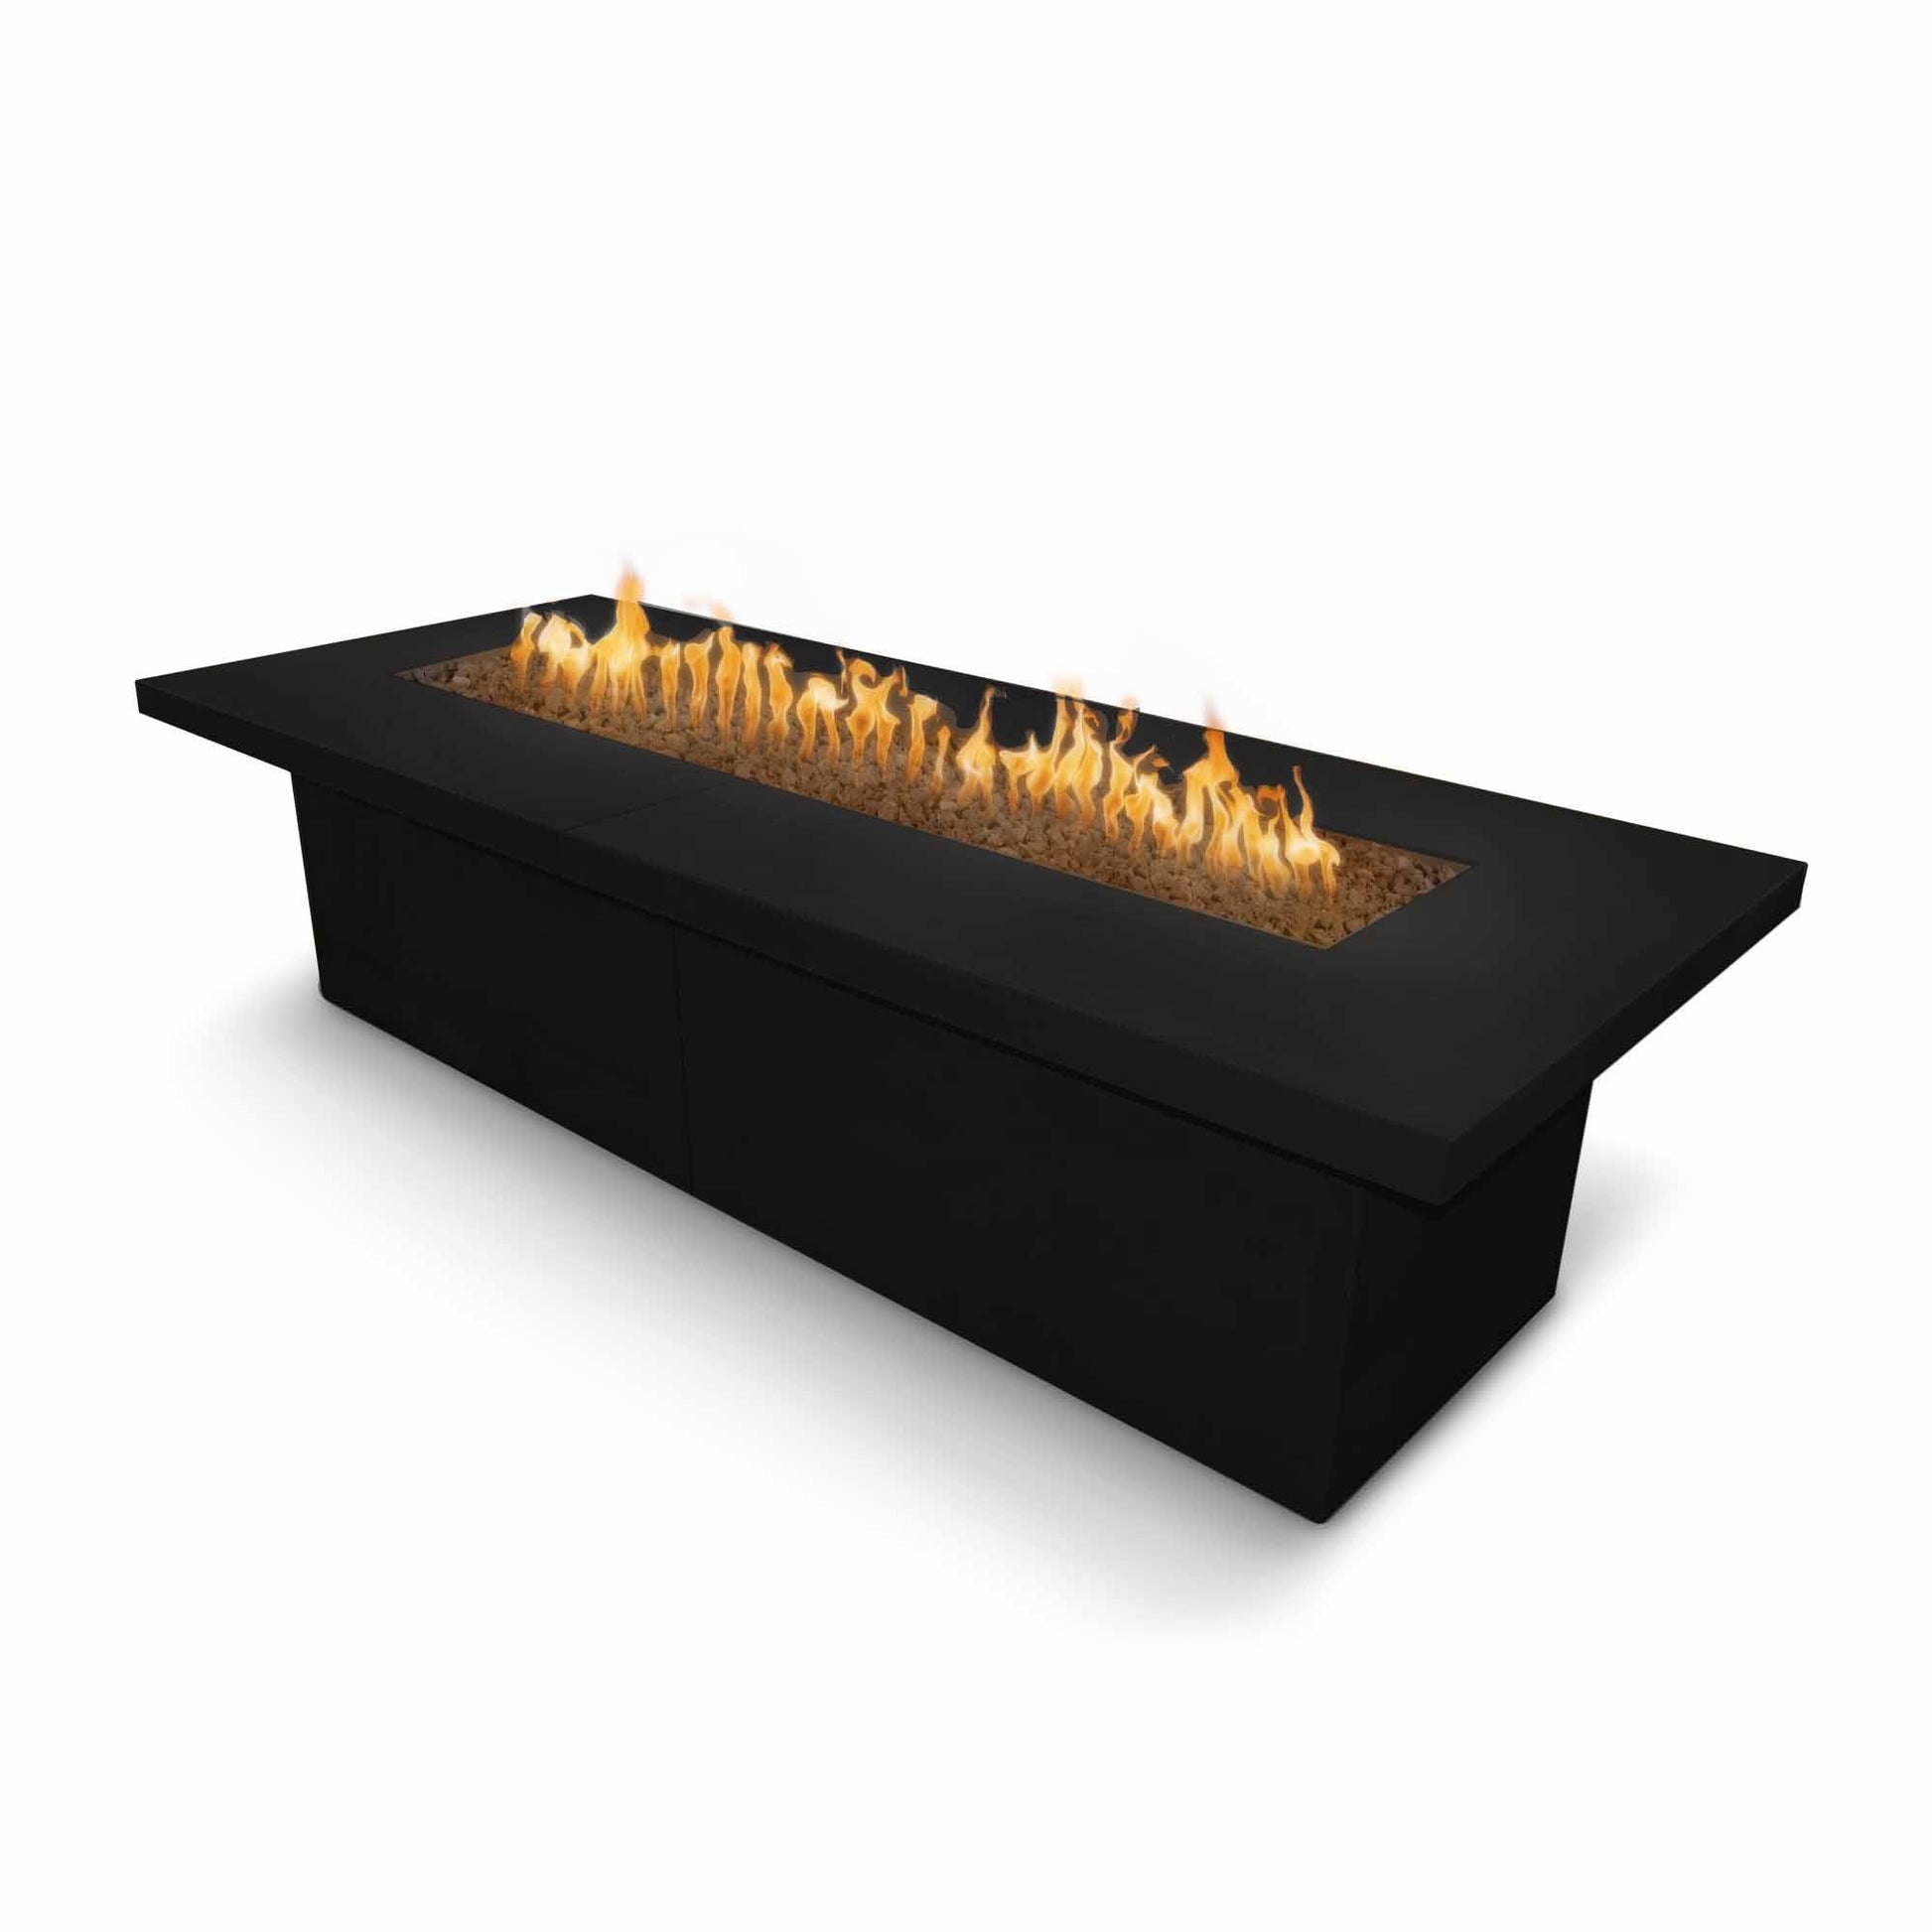 The Outdoor Plus Rectangular Newport 144" Hammered Copper Natural Gas Fire Pit with Flame Sense with Spark Ignition